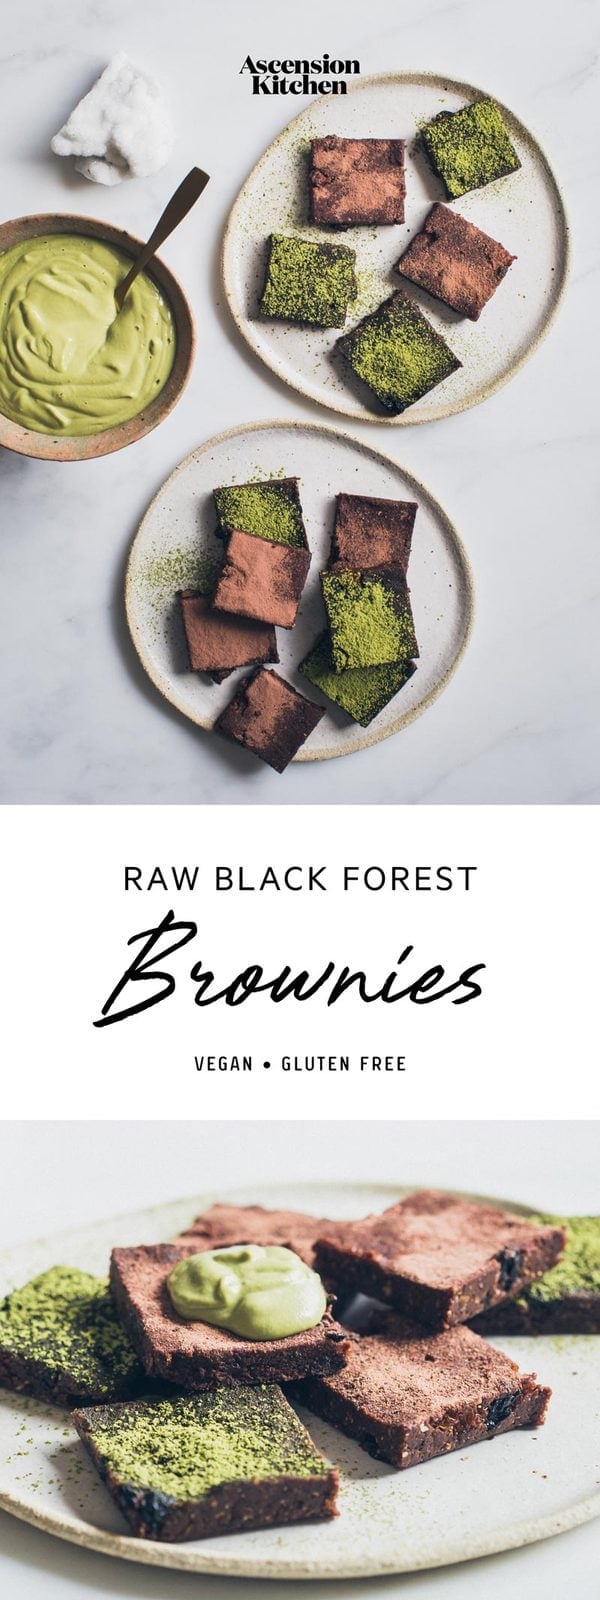 Raw Black Forest Brownies – fudgy vegan brownies, gluten free and totally easy to make. #rawbrownies #rawbrowniesrecipe #rawbrowniesvegan #blackforestbrownies #blackforestbrownieseasy #healthybrownies #glutenfreebrownies #veganbrownies #AscensionKitchen // Pin to your own inspiration board! //